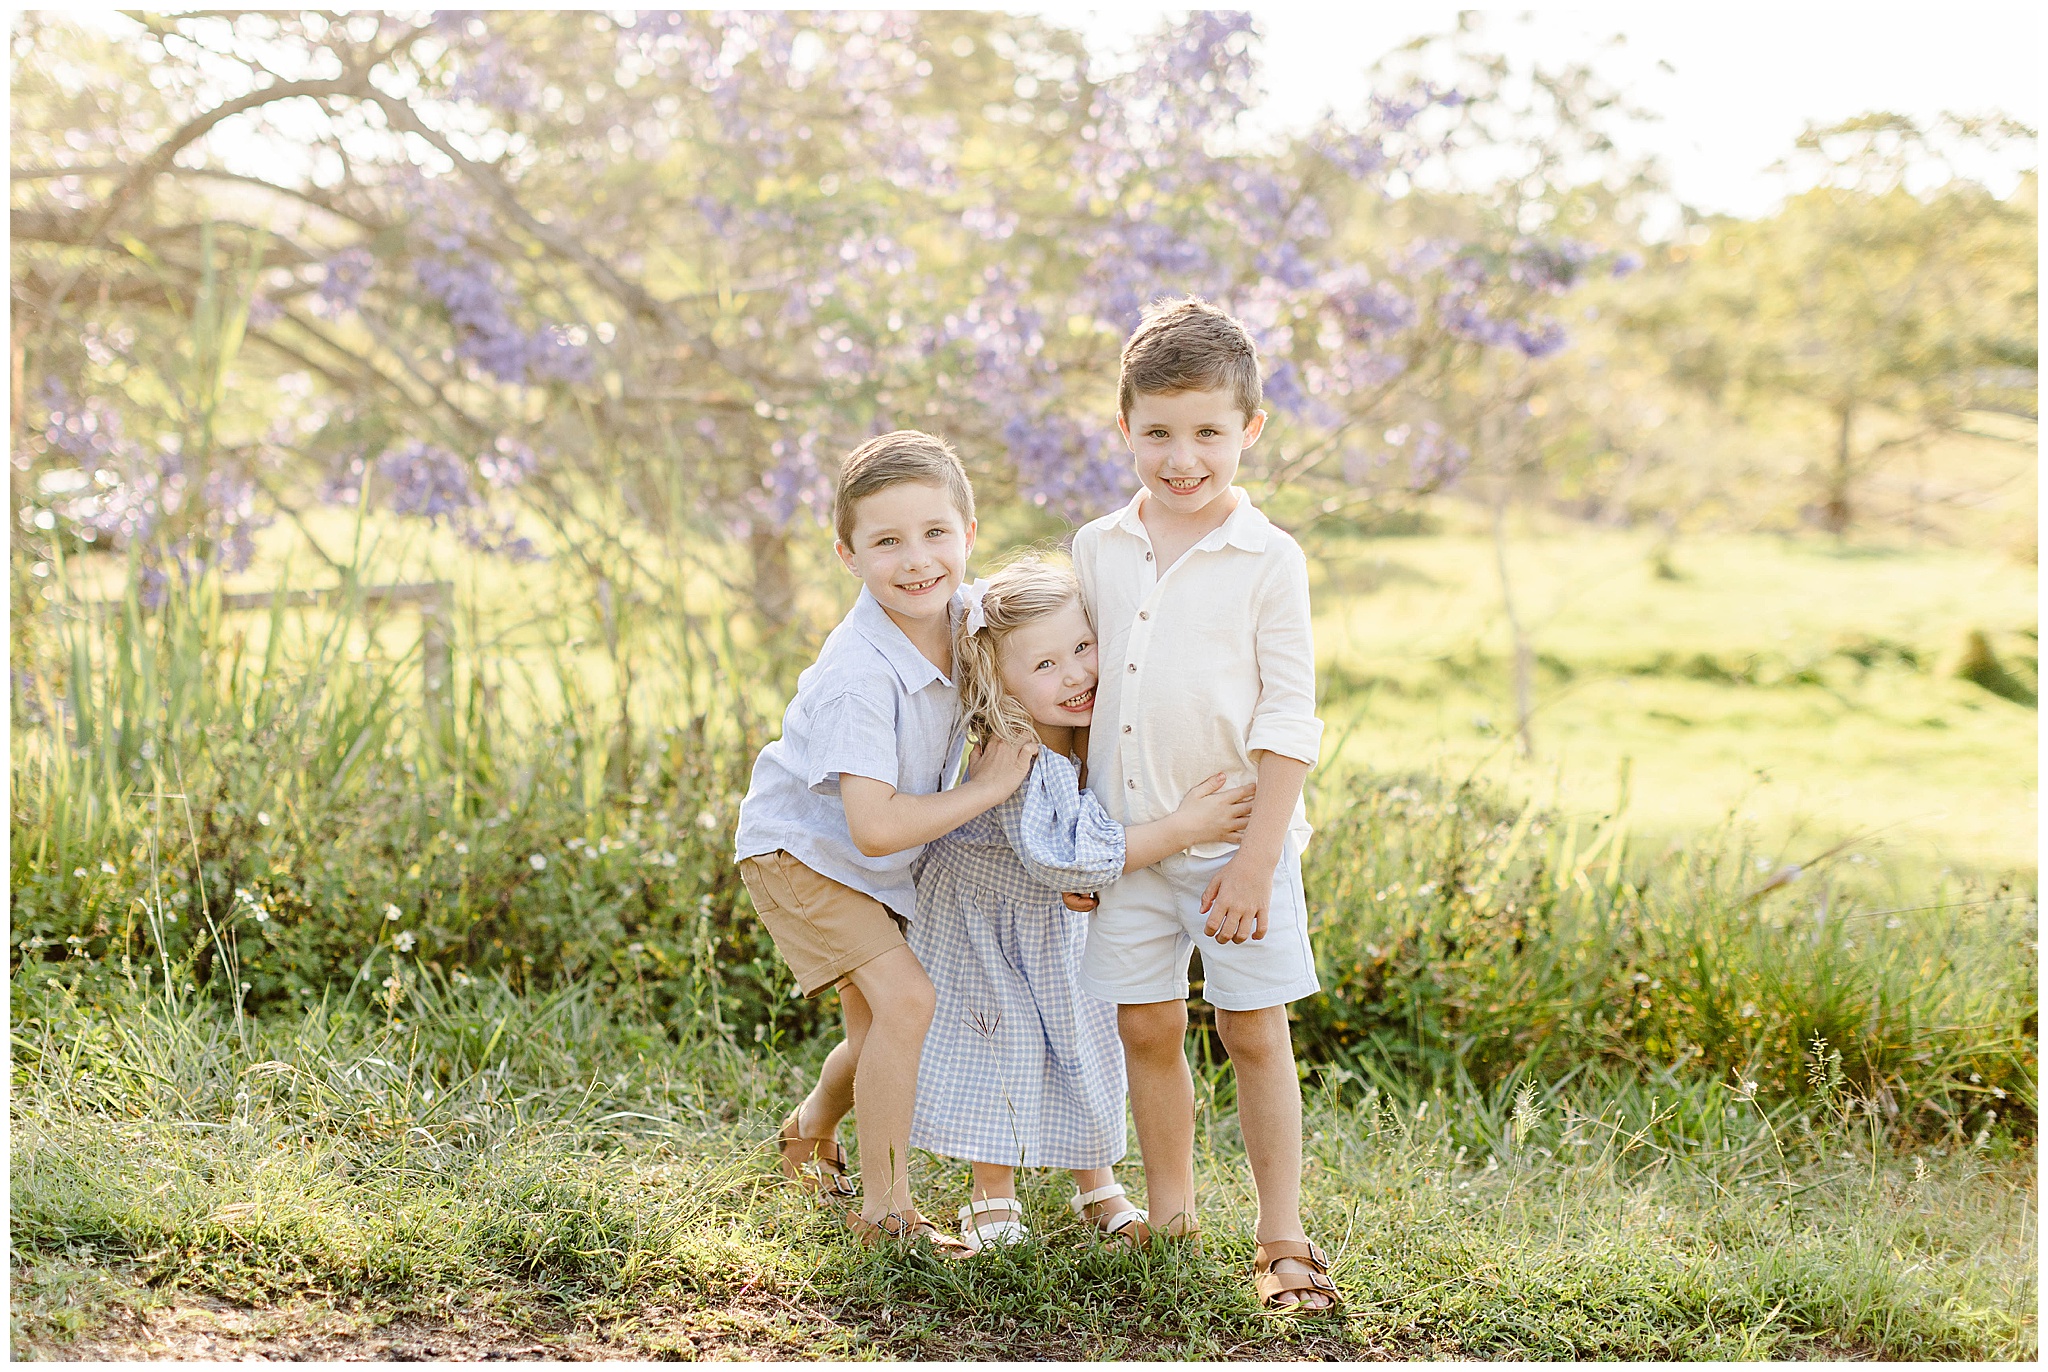 Fashionable kids during family photoshoot with Alyce Holzy